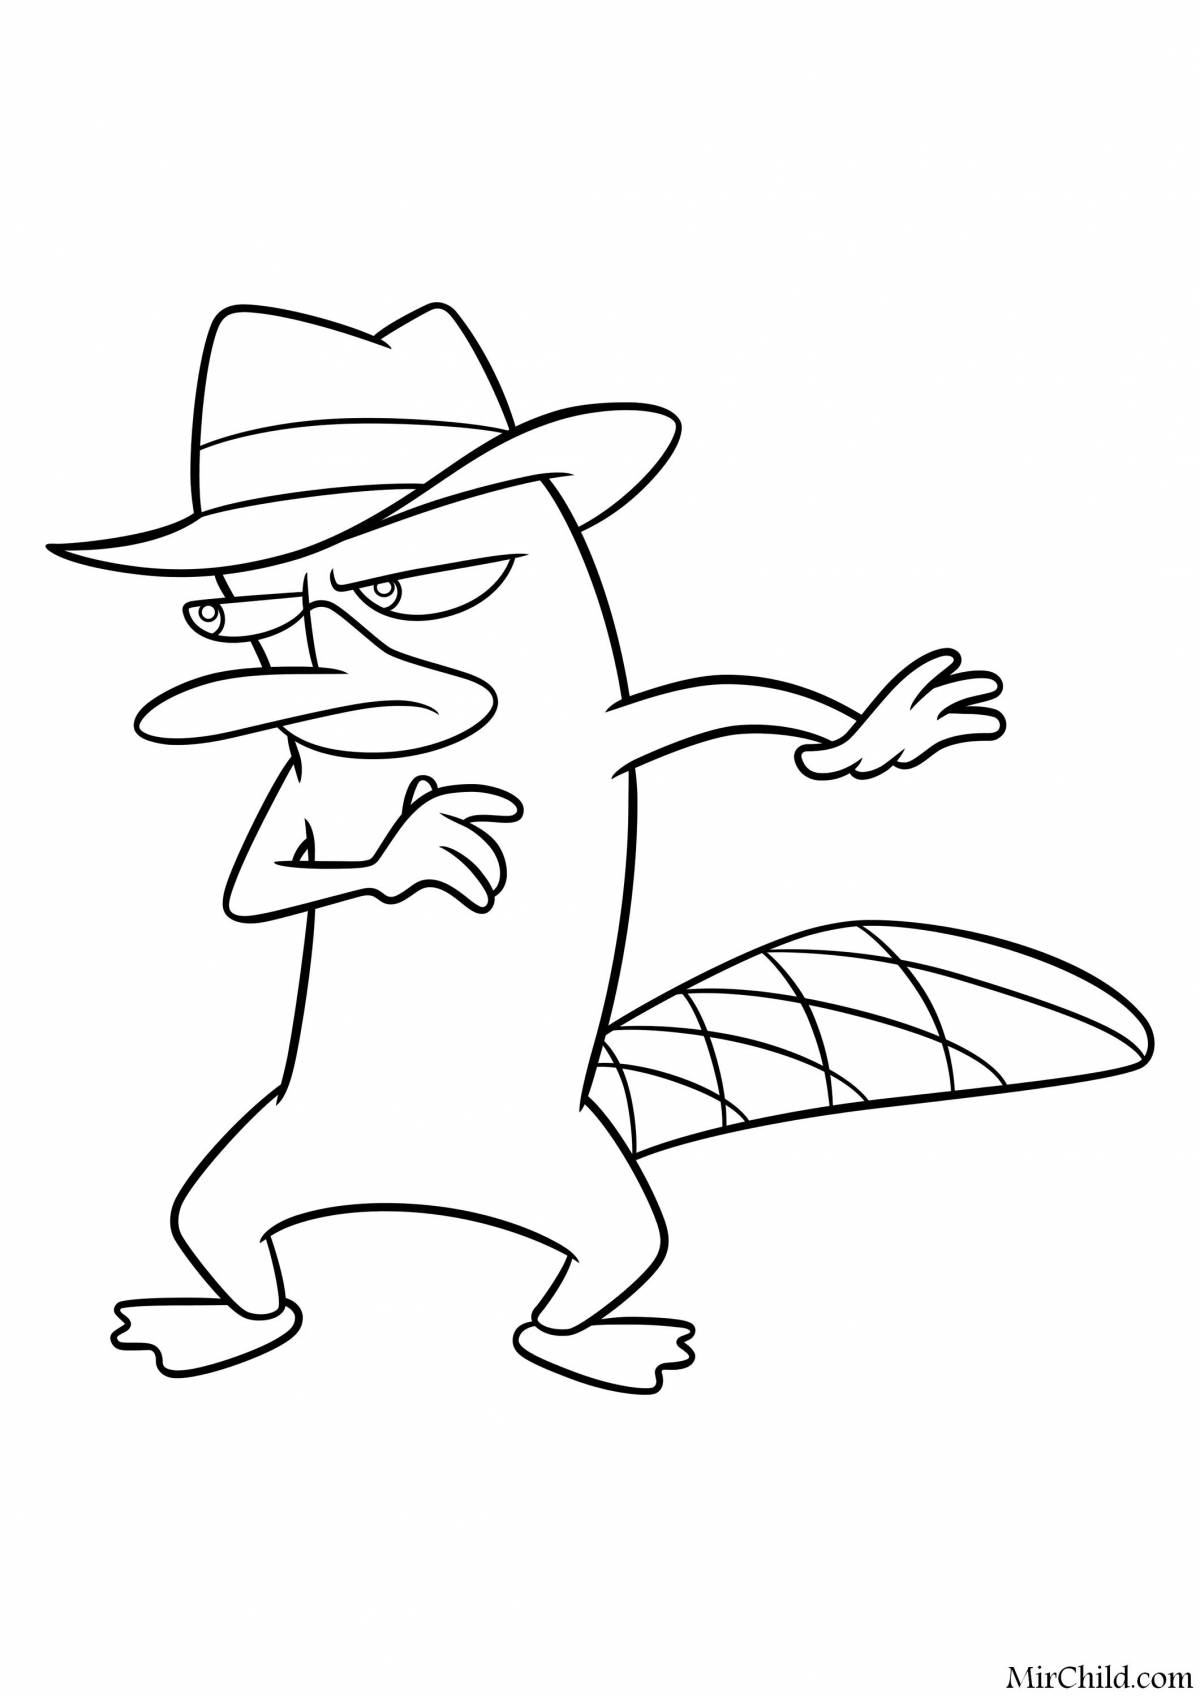 Coloring page dazzling platypus perry